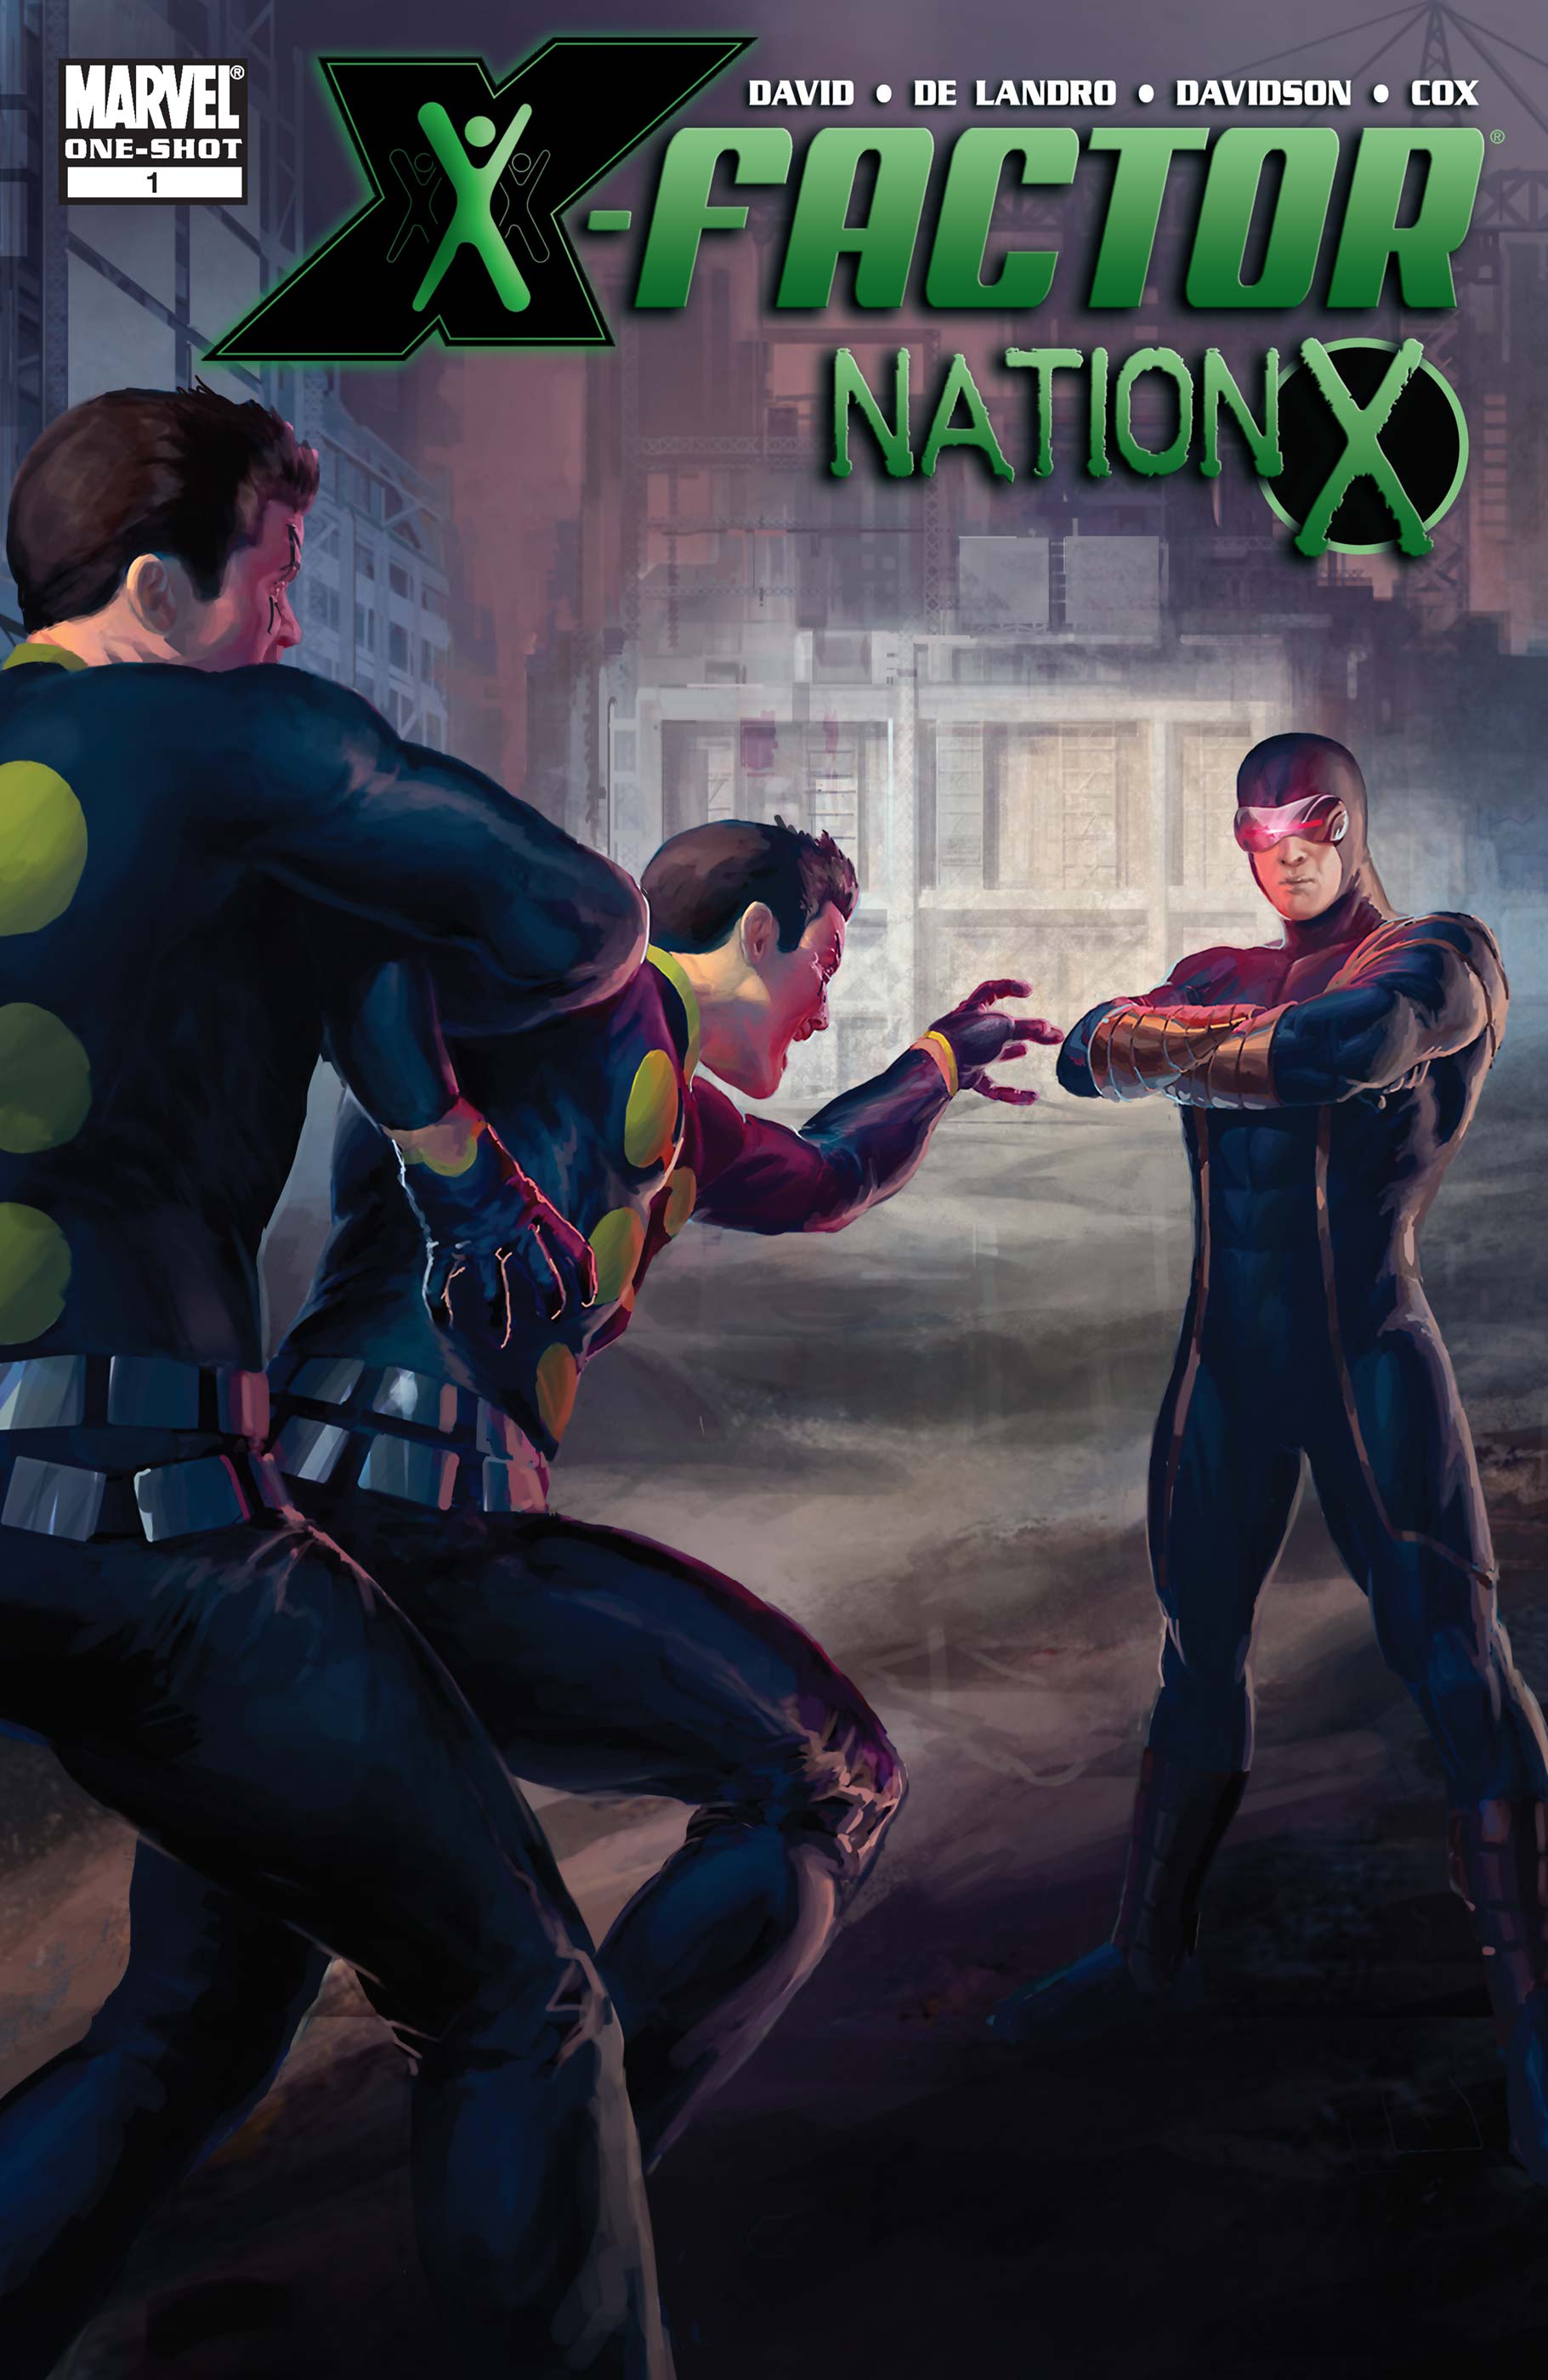 Nation X: X-Factor (2010) #1